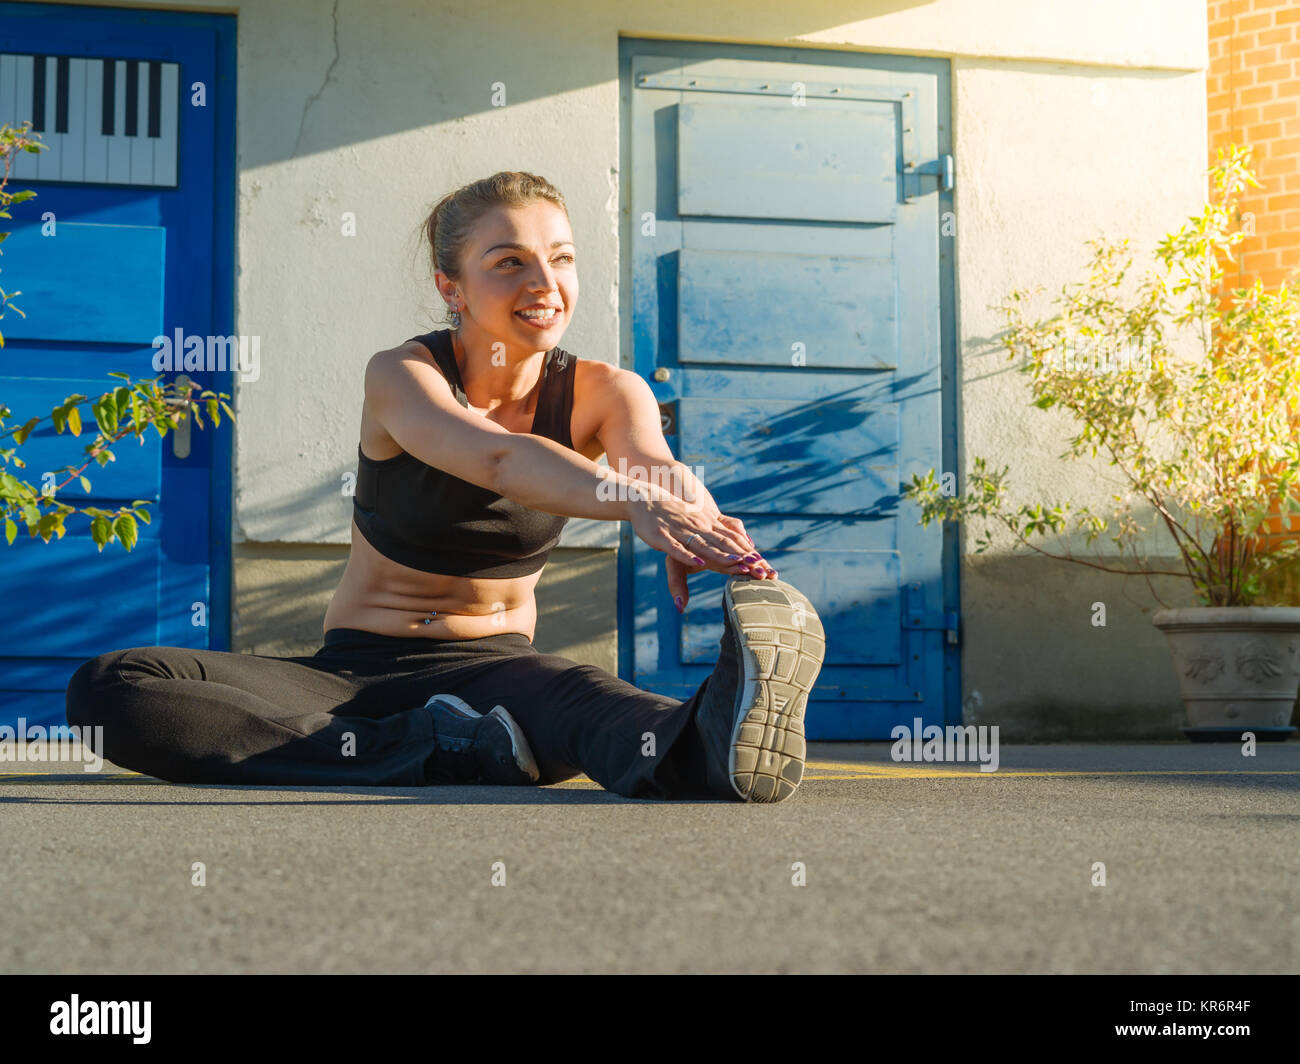 Young woman stretching outdoors Stock Photo